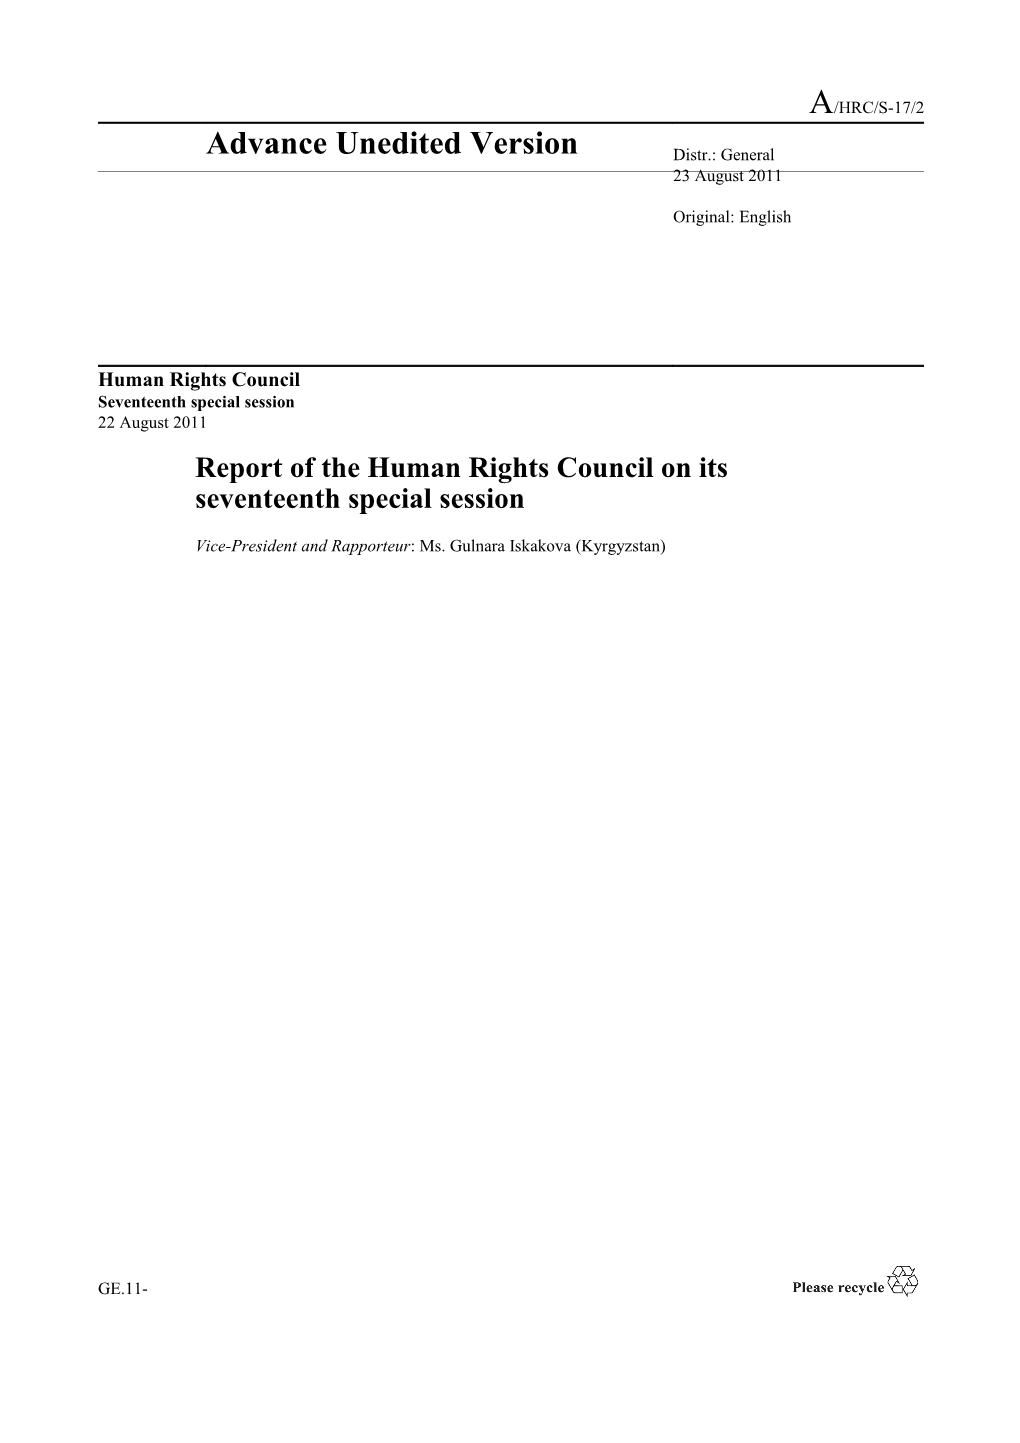 Report of the Human Rights Council on Its Seventeenth Special Session